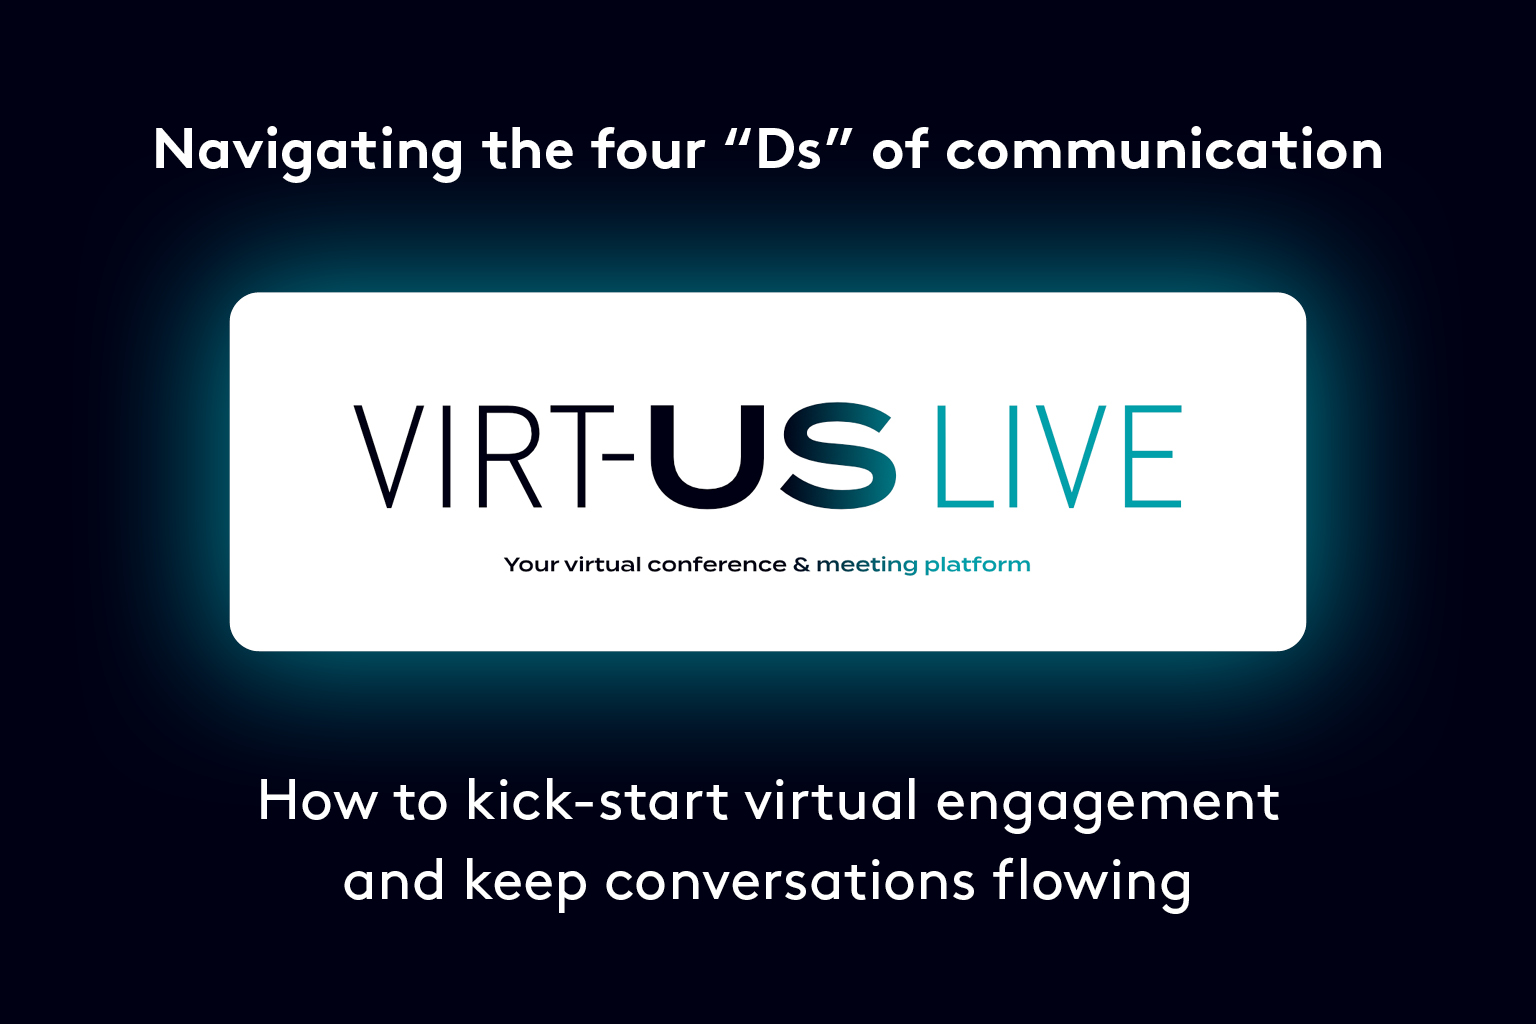 Navigating the four “D” of communication: how to kick-start virtual engagement